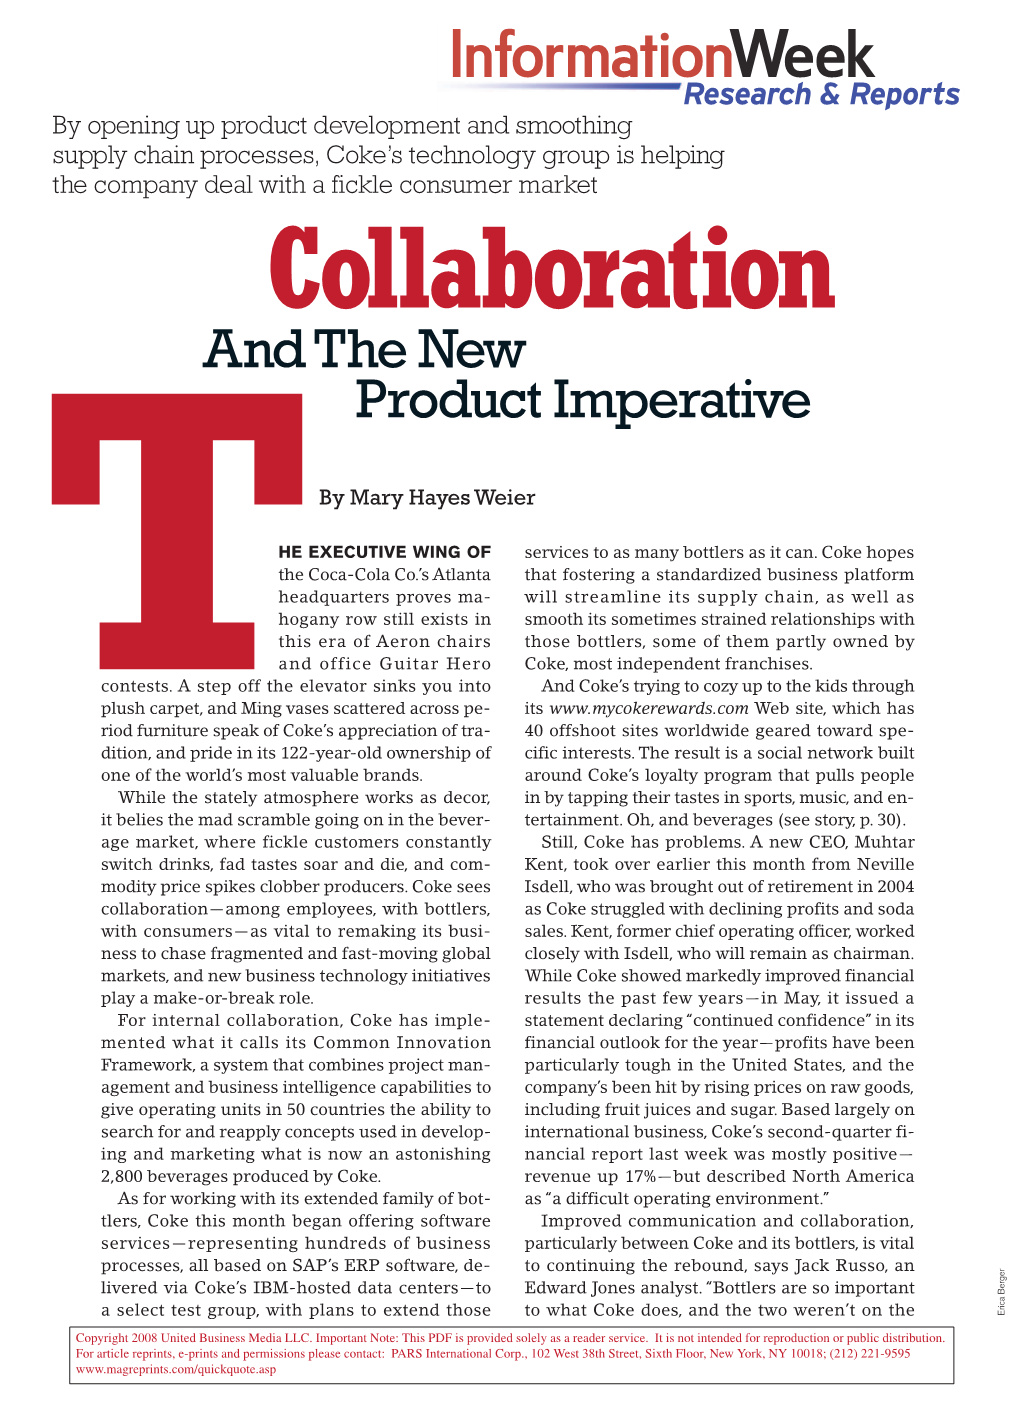 Collaboration and the New Product Imperative